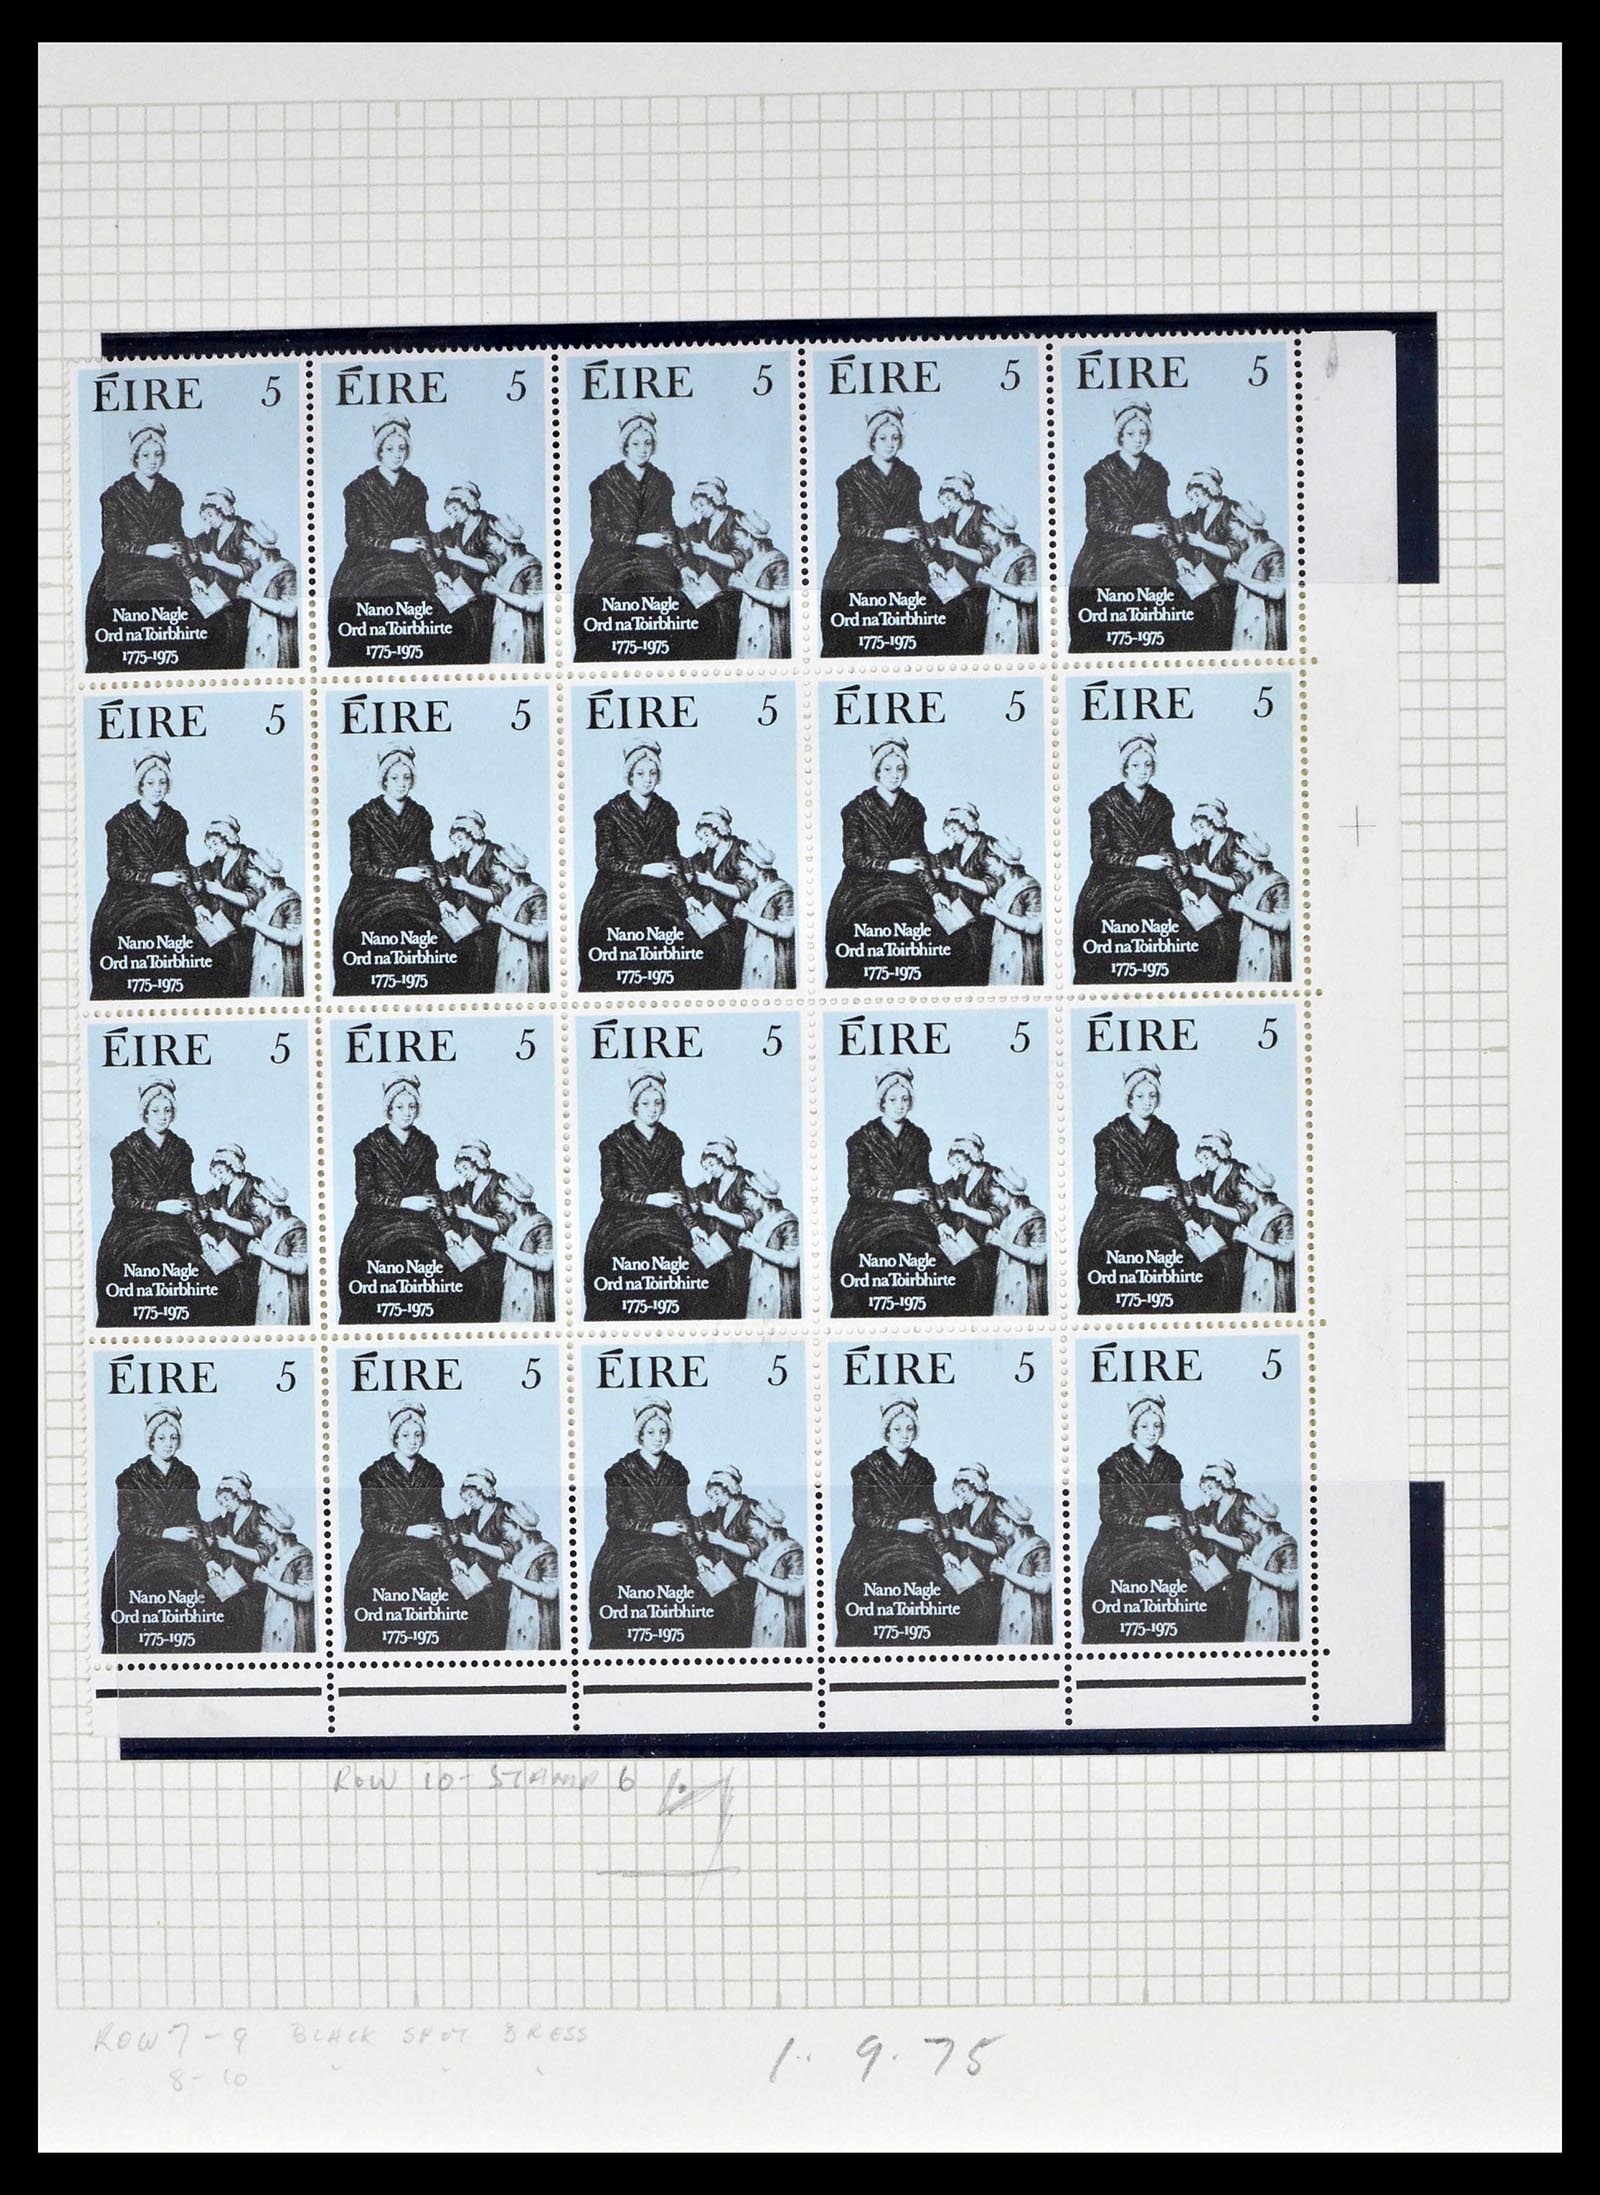 39272 0048 - Stamp collection 39272 Ireland plateflaws and varities 1963-1981.